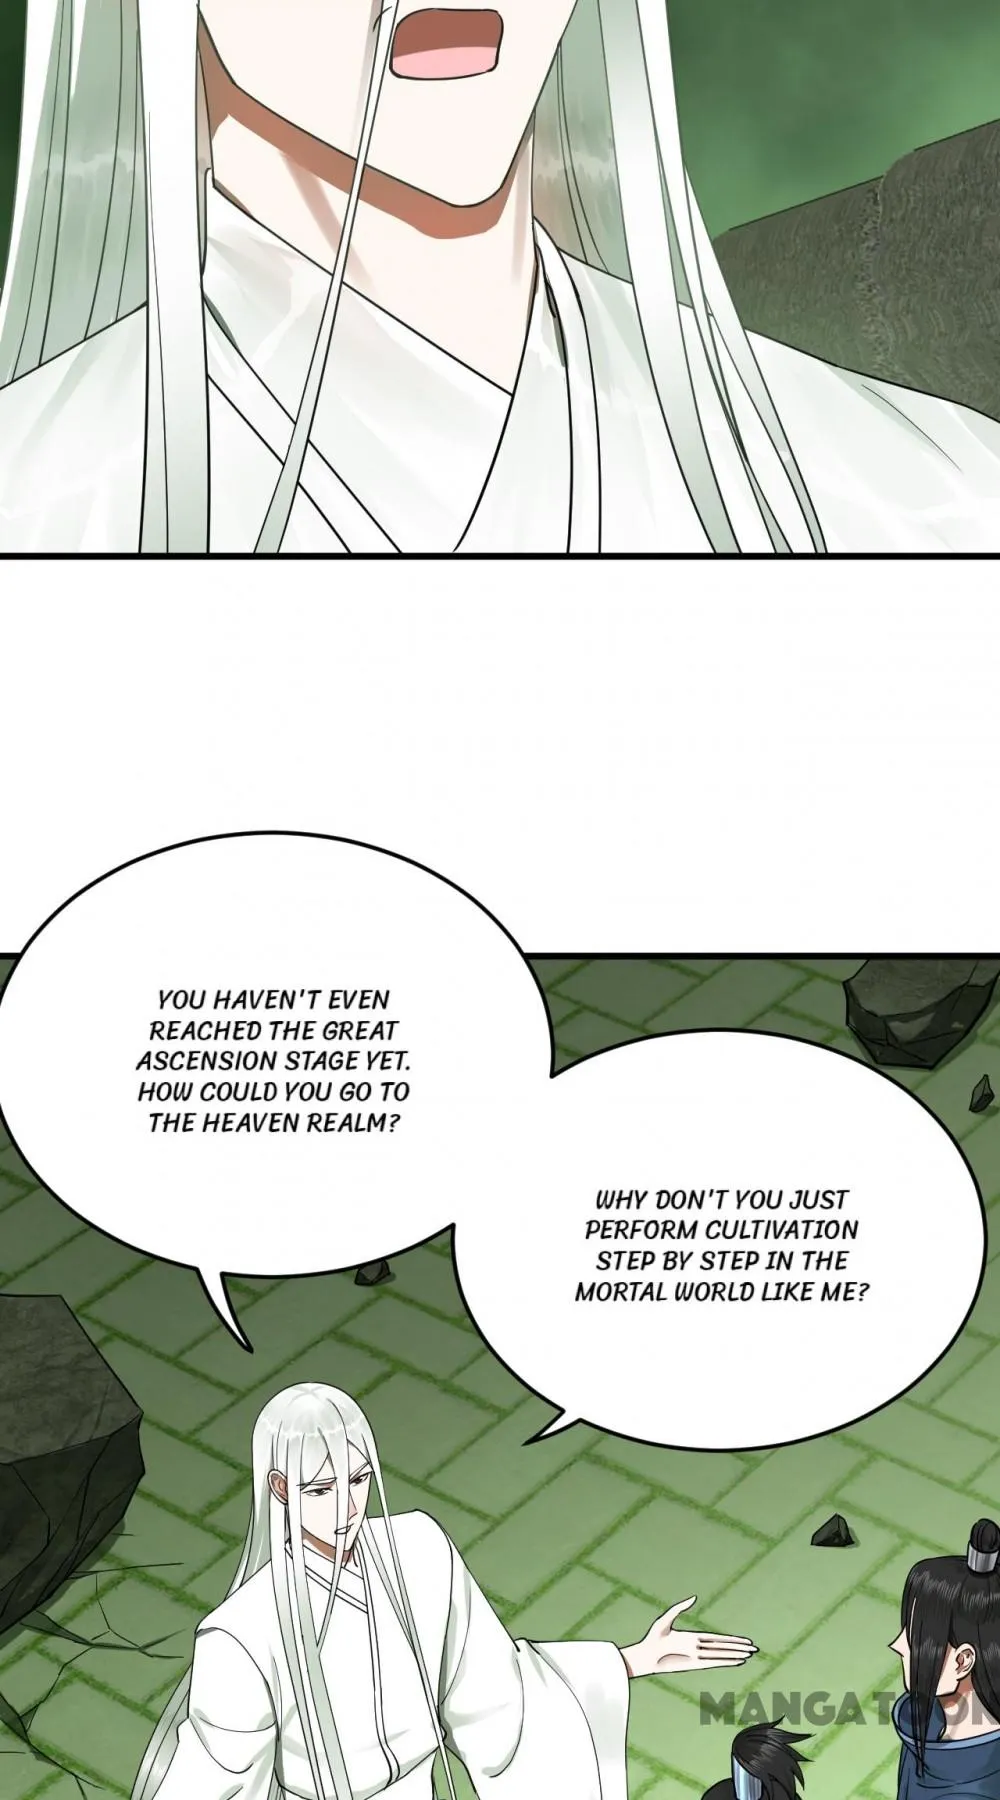 My Three Thousand Years To The Sky Chapter 233 - Page 29